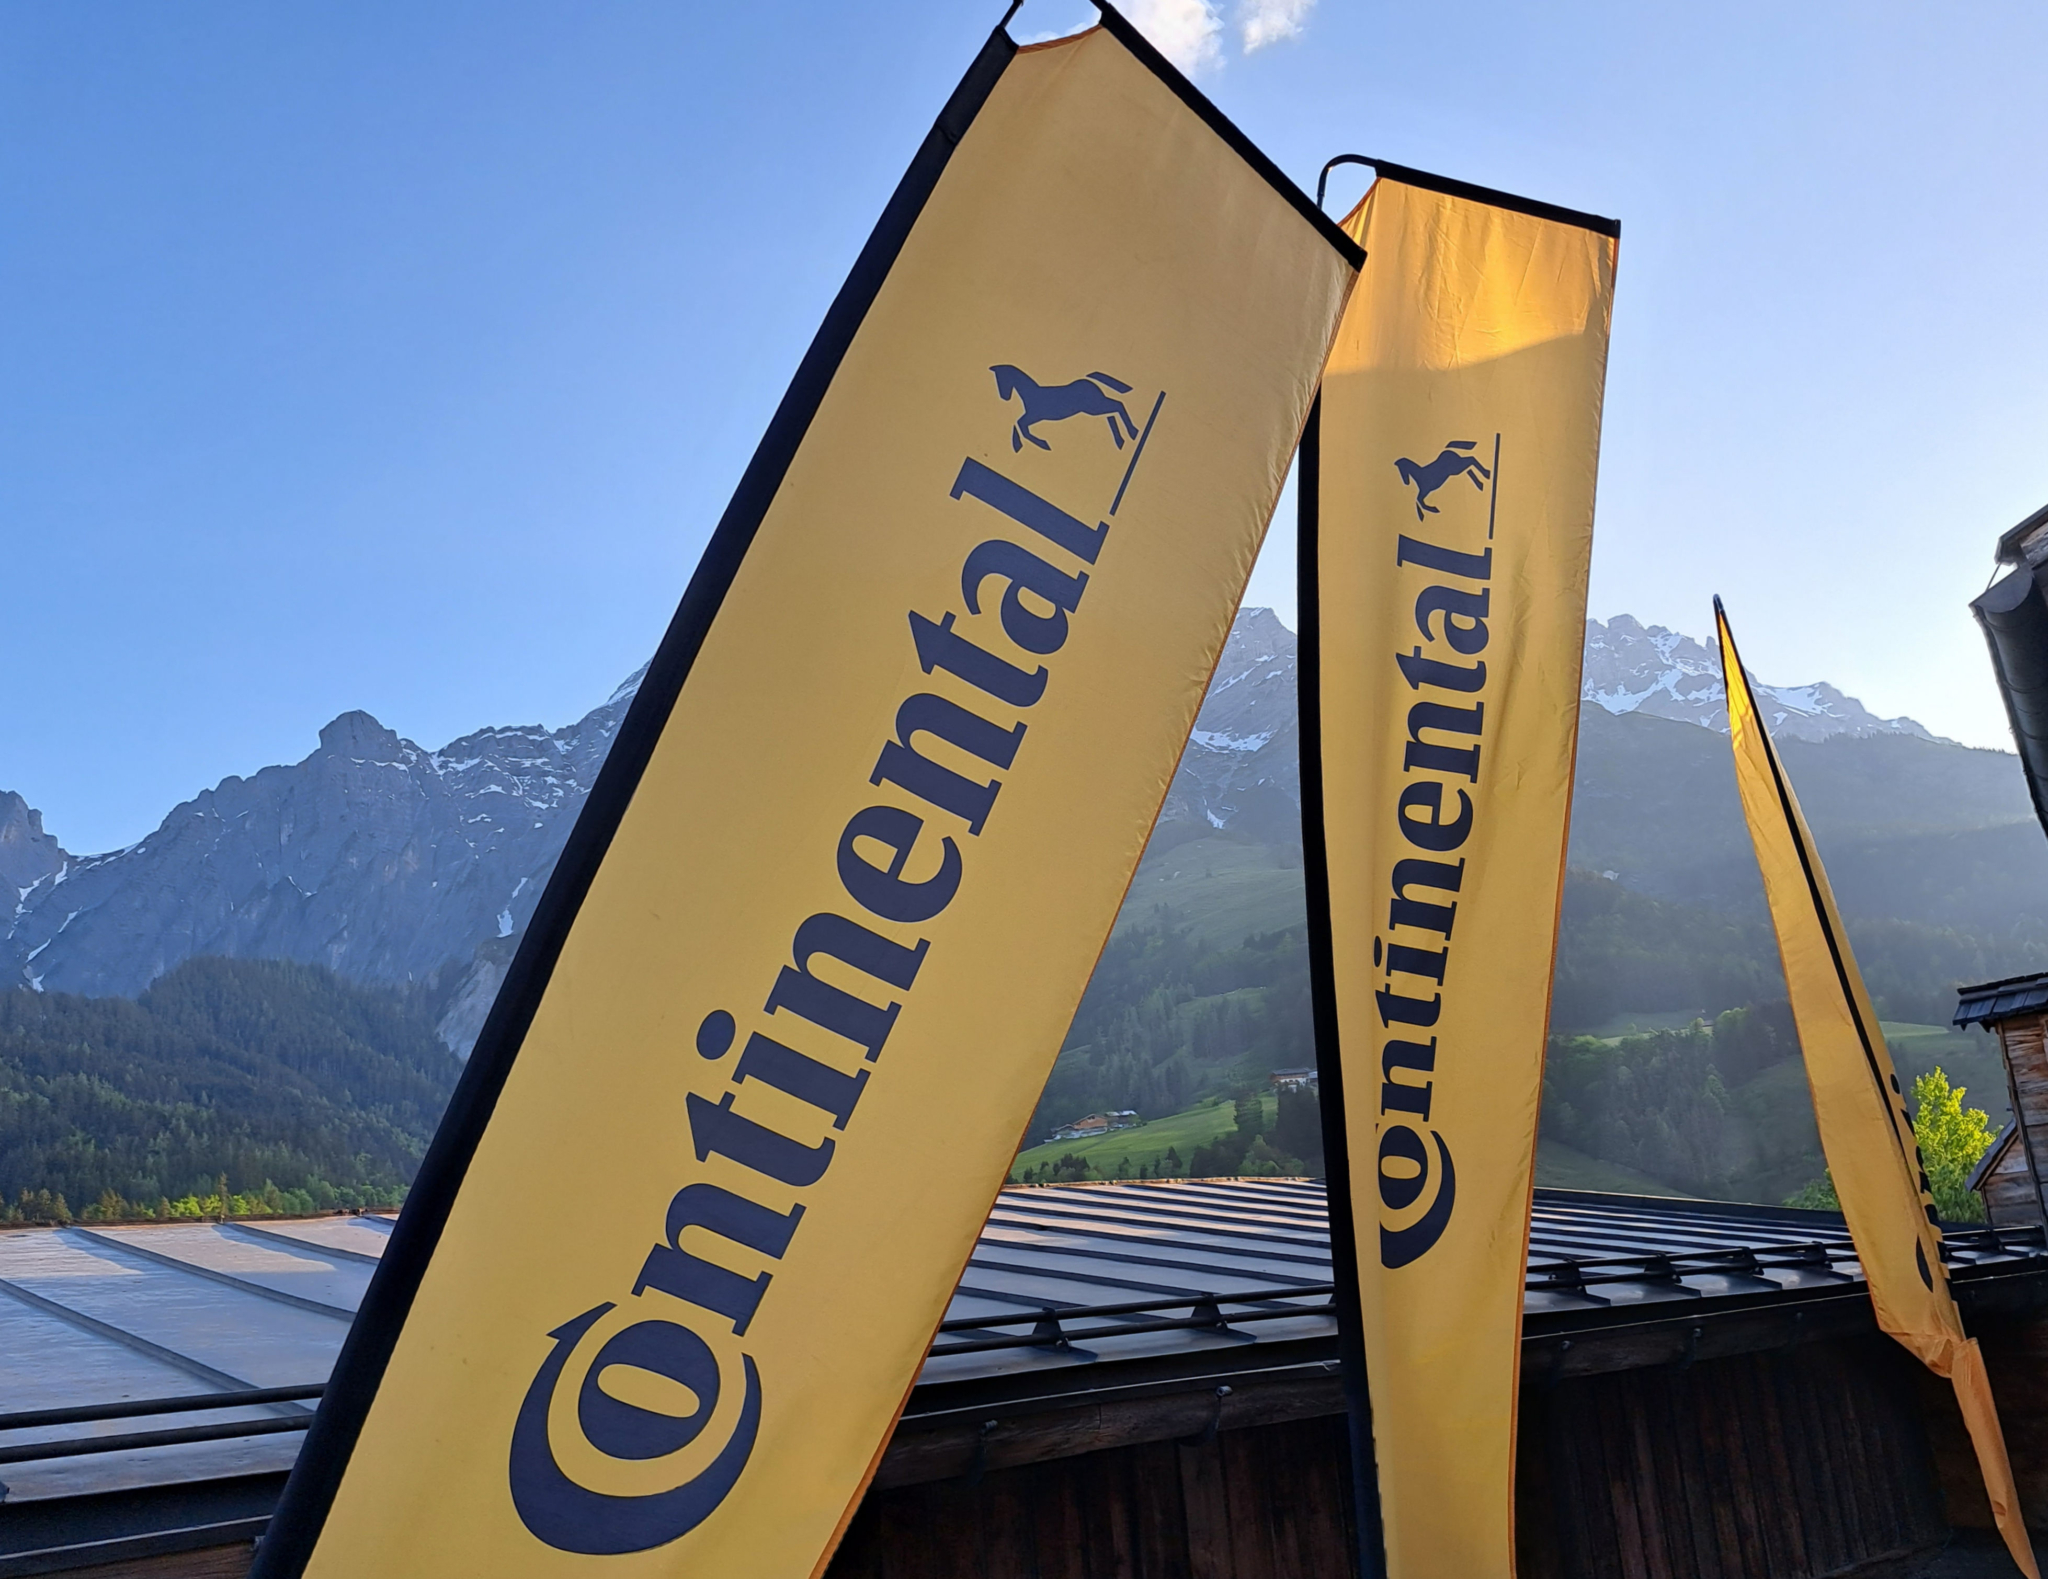 Continental closing 2 Automotive sites in Germany